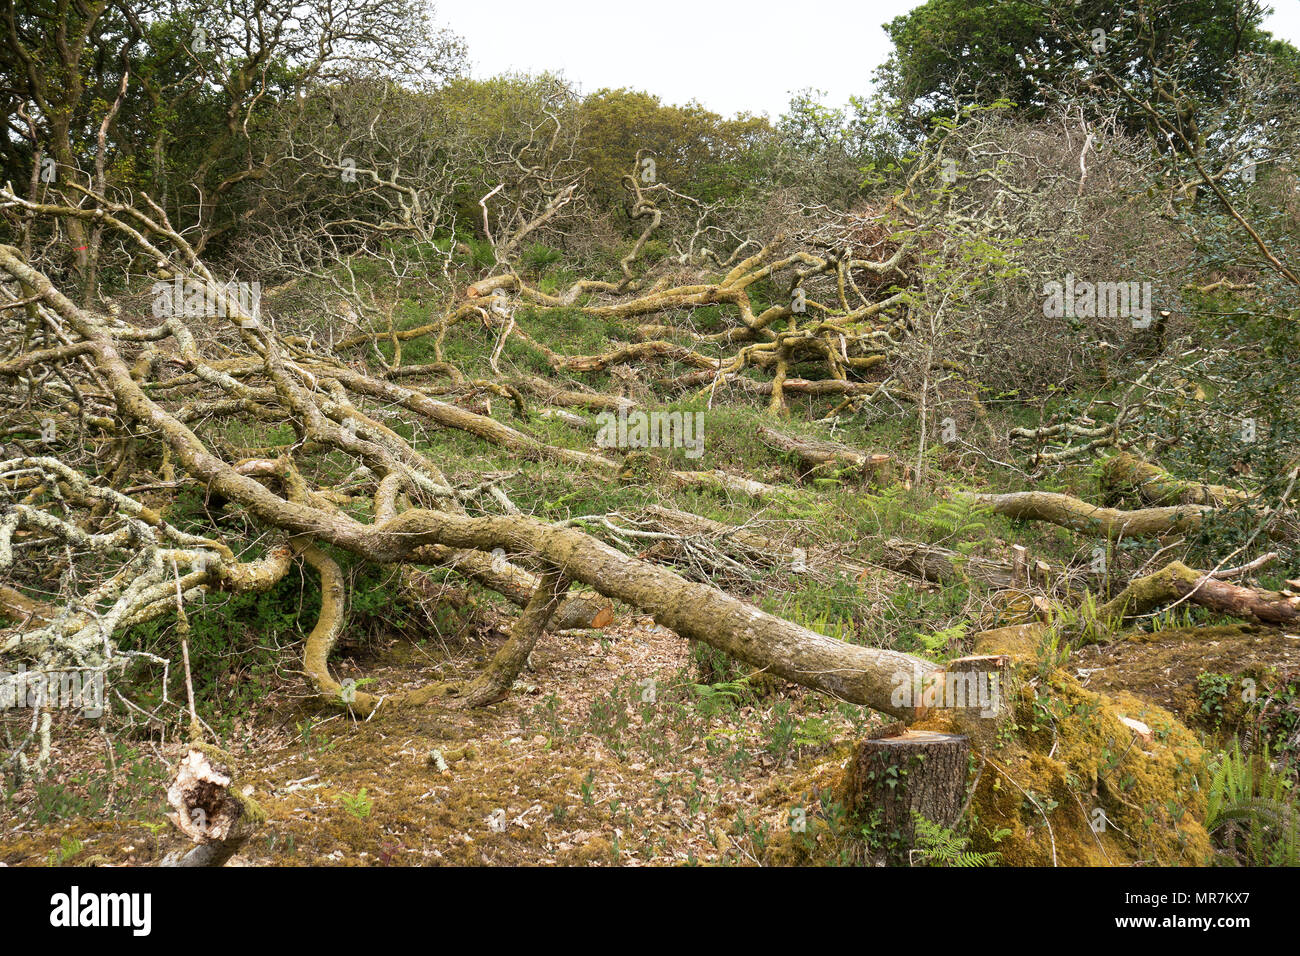 ancient woodland clearance, tree felling coppicing at unity woods, cornwall, england, britain, uk. Stock Photo